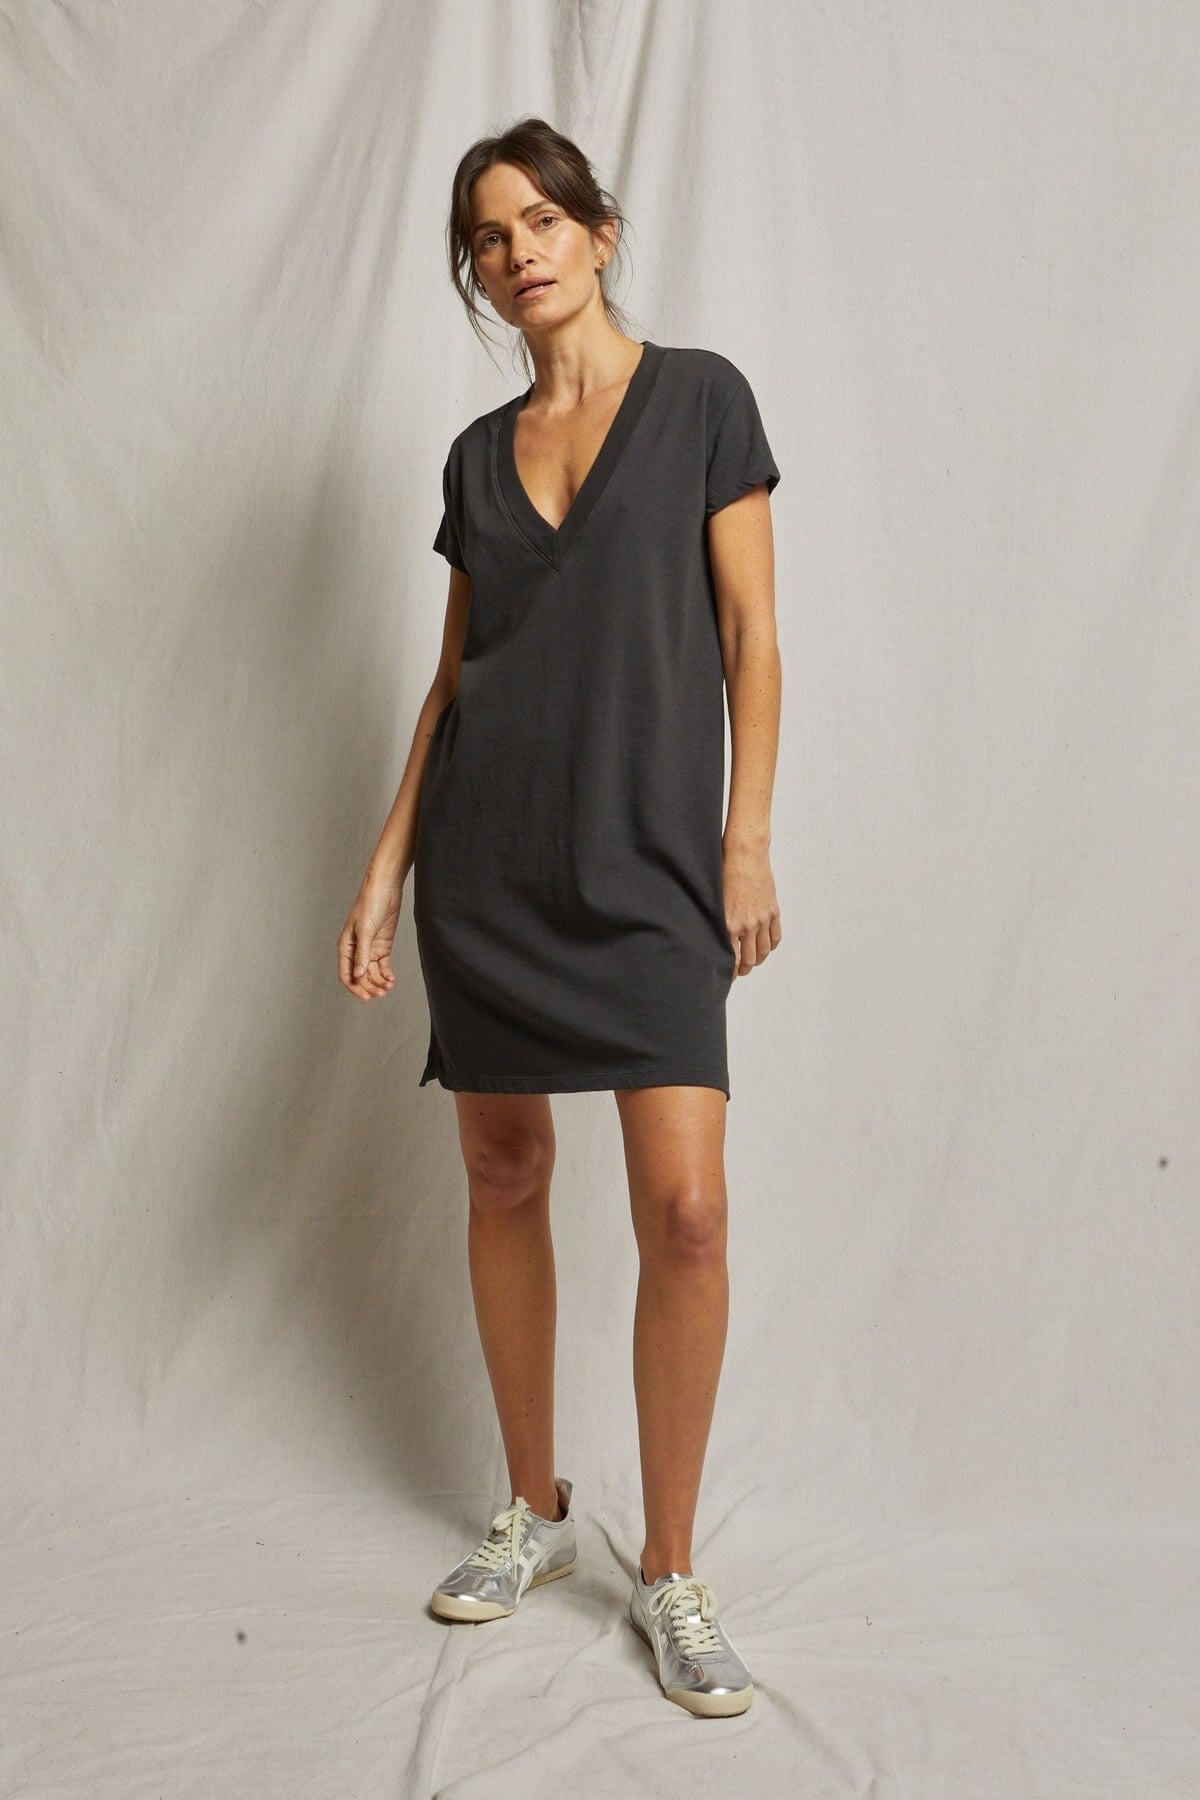 Perfect White Tee Opal jersey v neck dress in vintage black